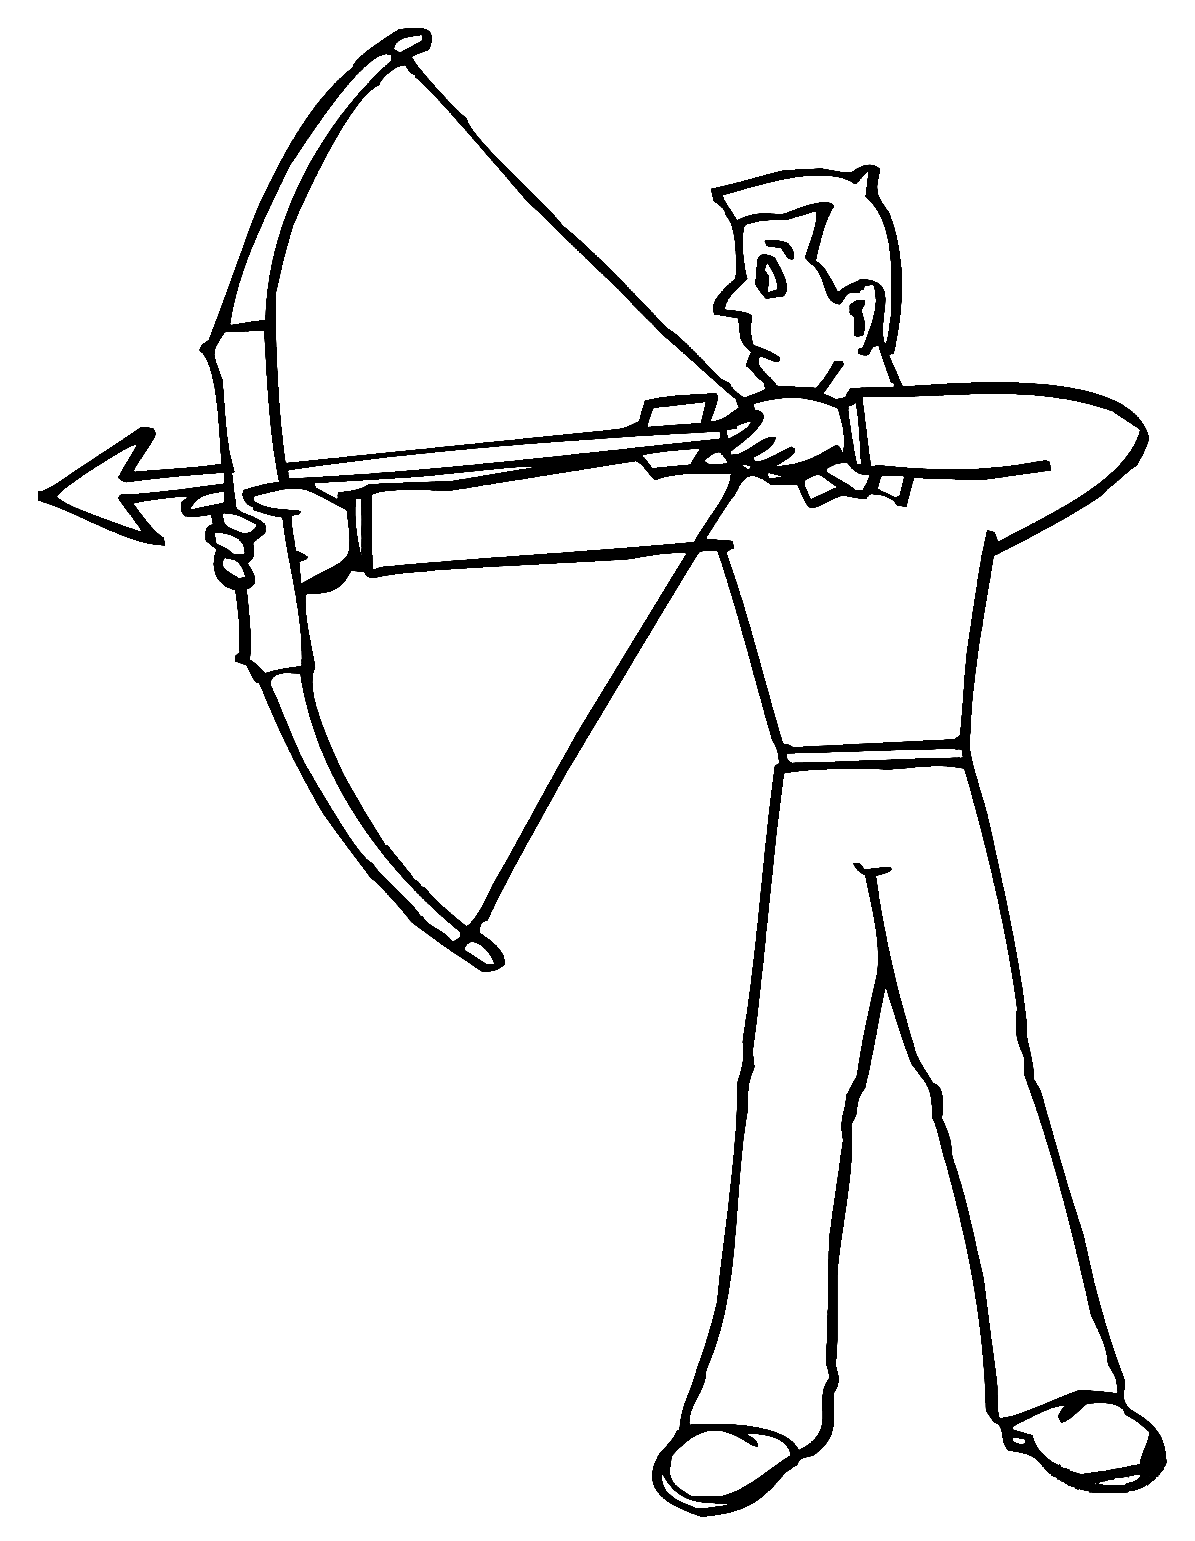 Archer Ready to Shoot Coloring Page